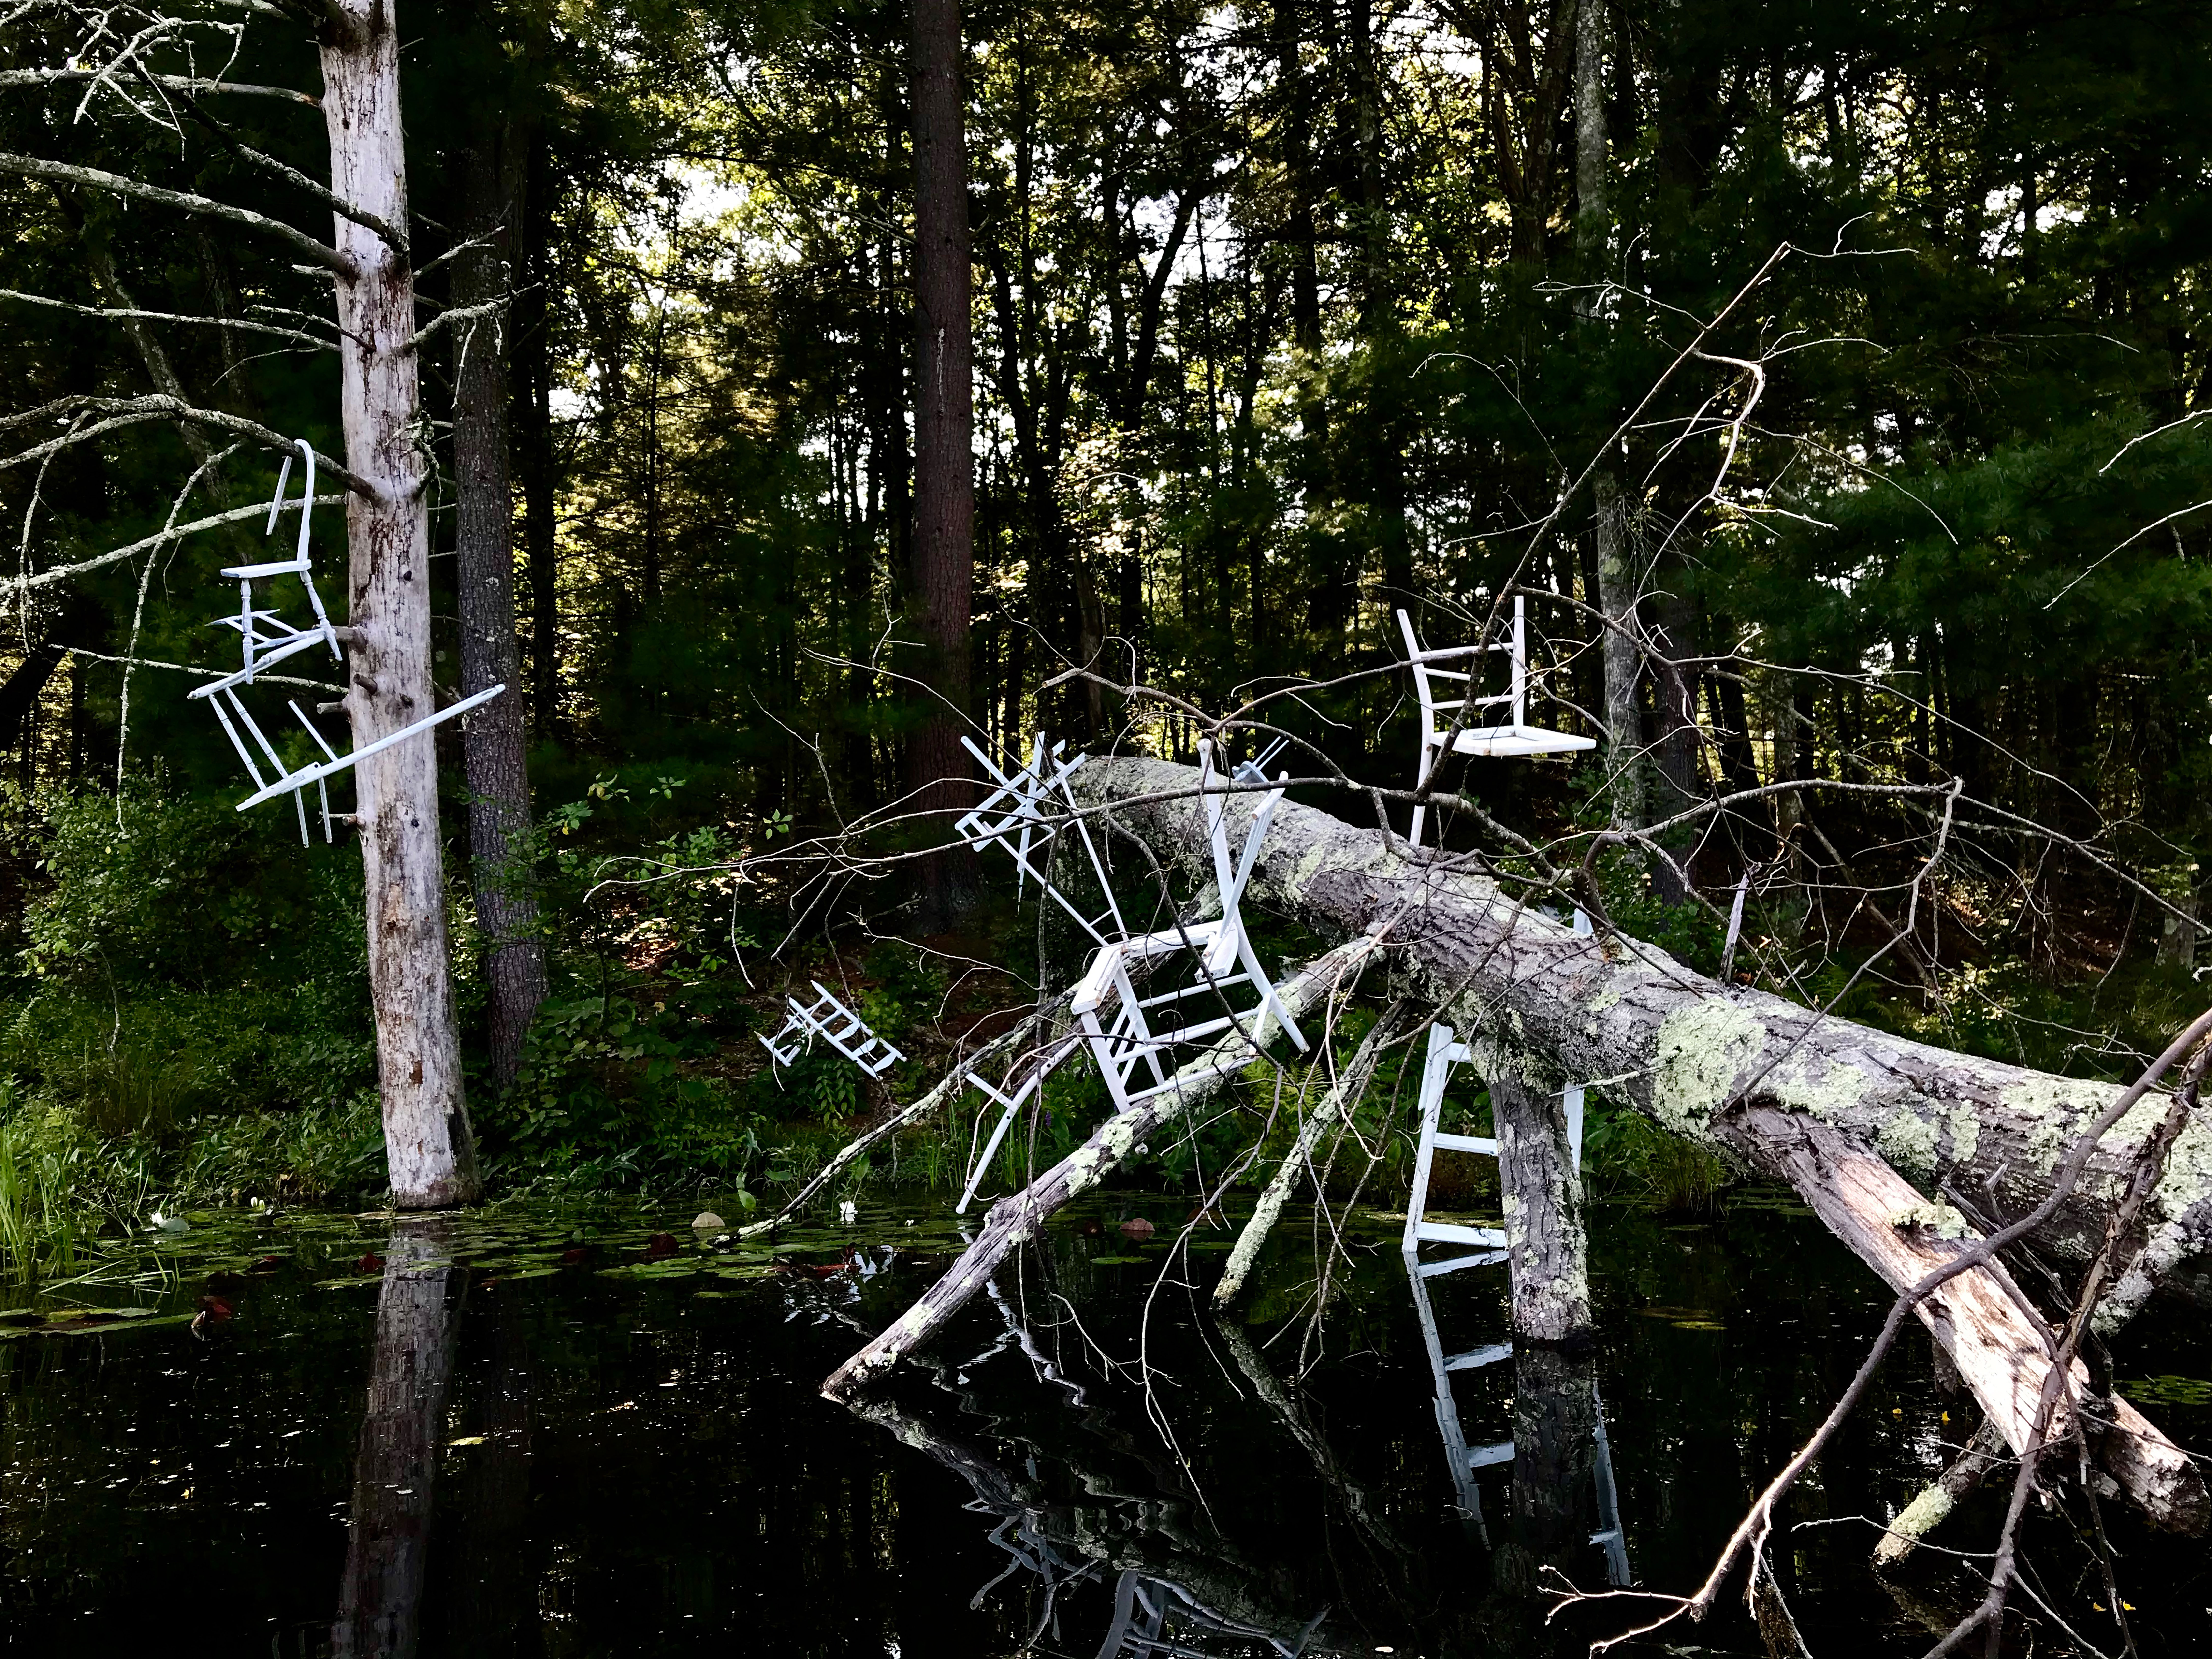 Photograph capturing a detail of 'Metamorphic Reflections' installation by artist Caroline Coolidge. This detail features a large tree on the left side of the image, with a deteriorating chair hanging from it. On the right side, the fallen tree trunk has numerous white wooden objects attached to it.